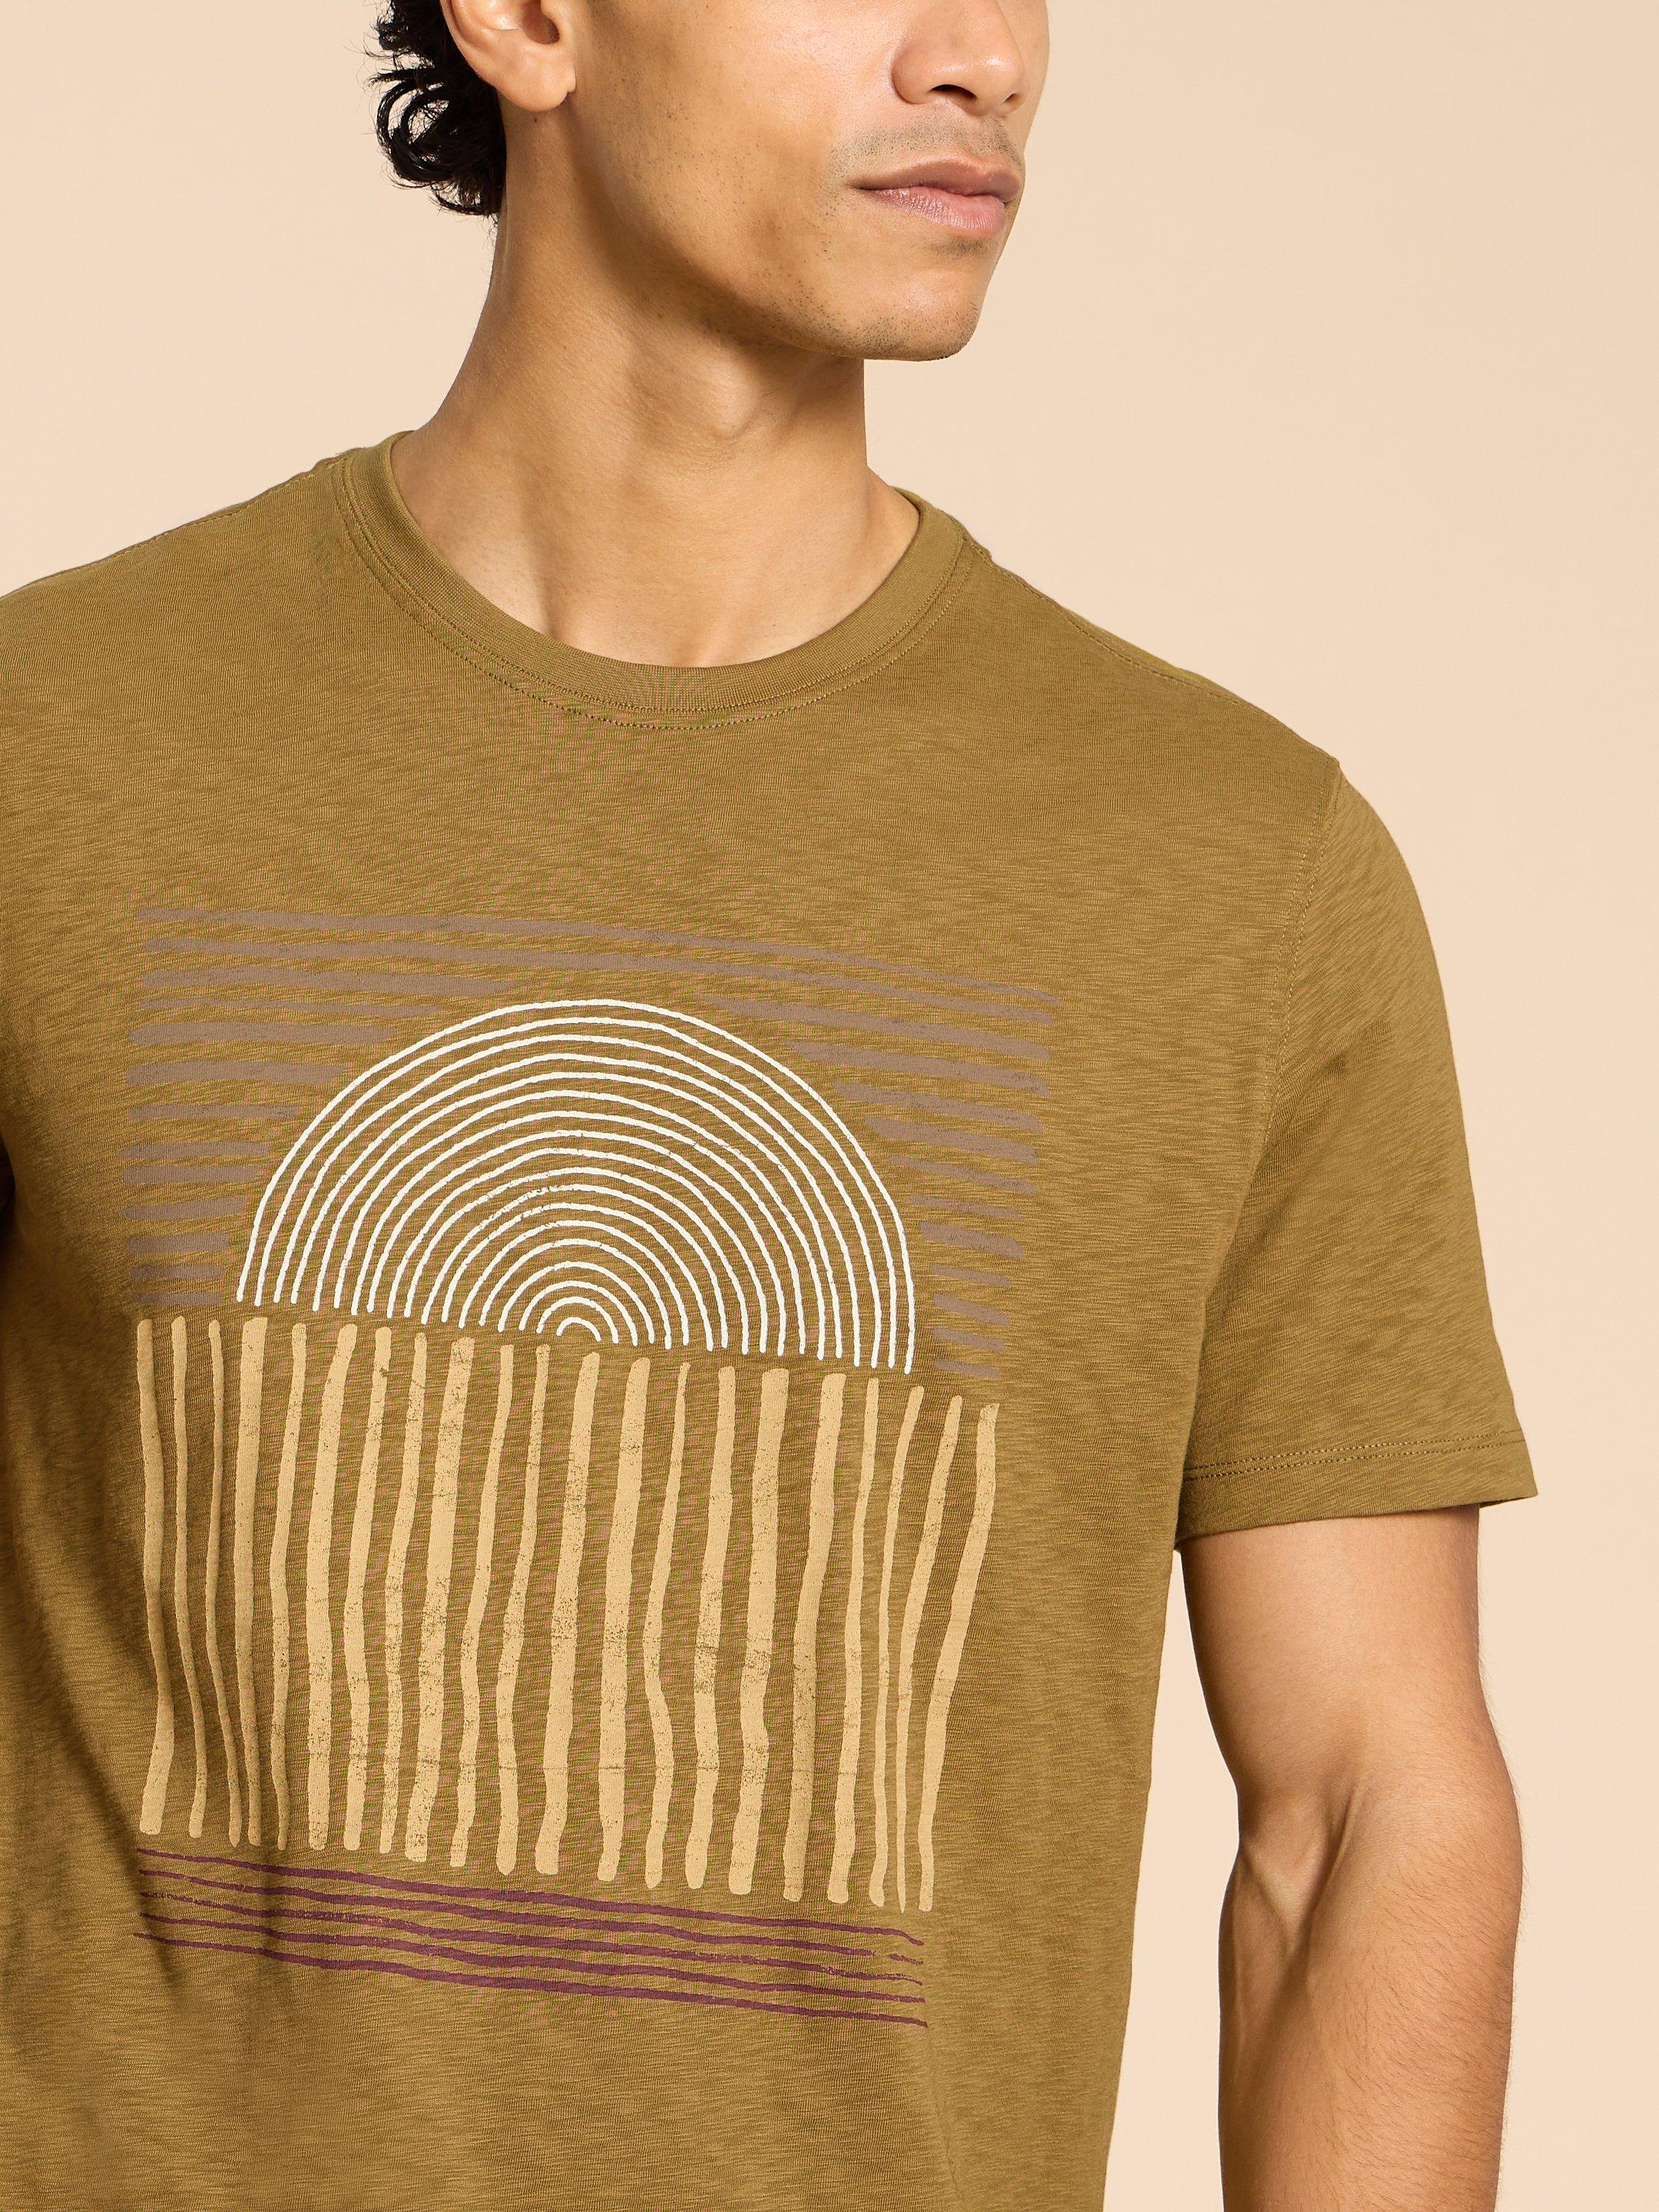 Abstract Sun Graphic Tee in GREEN PR - MODEL DETAIL